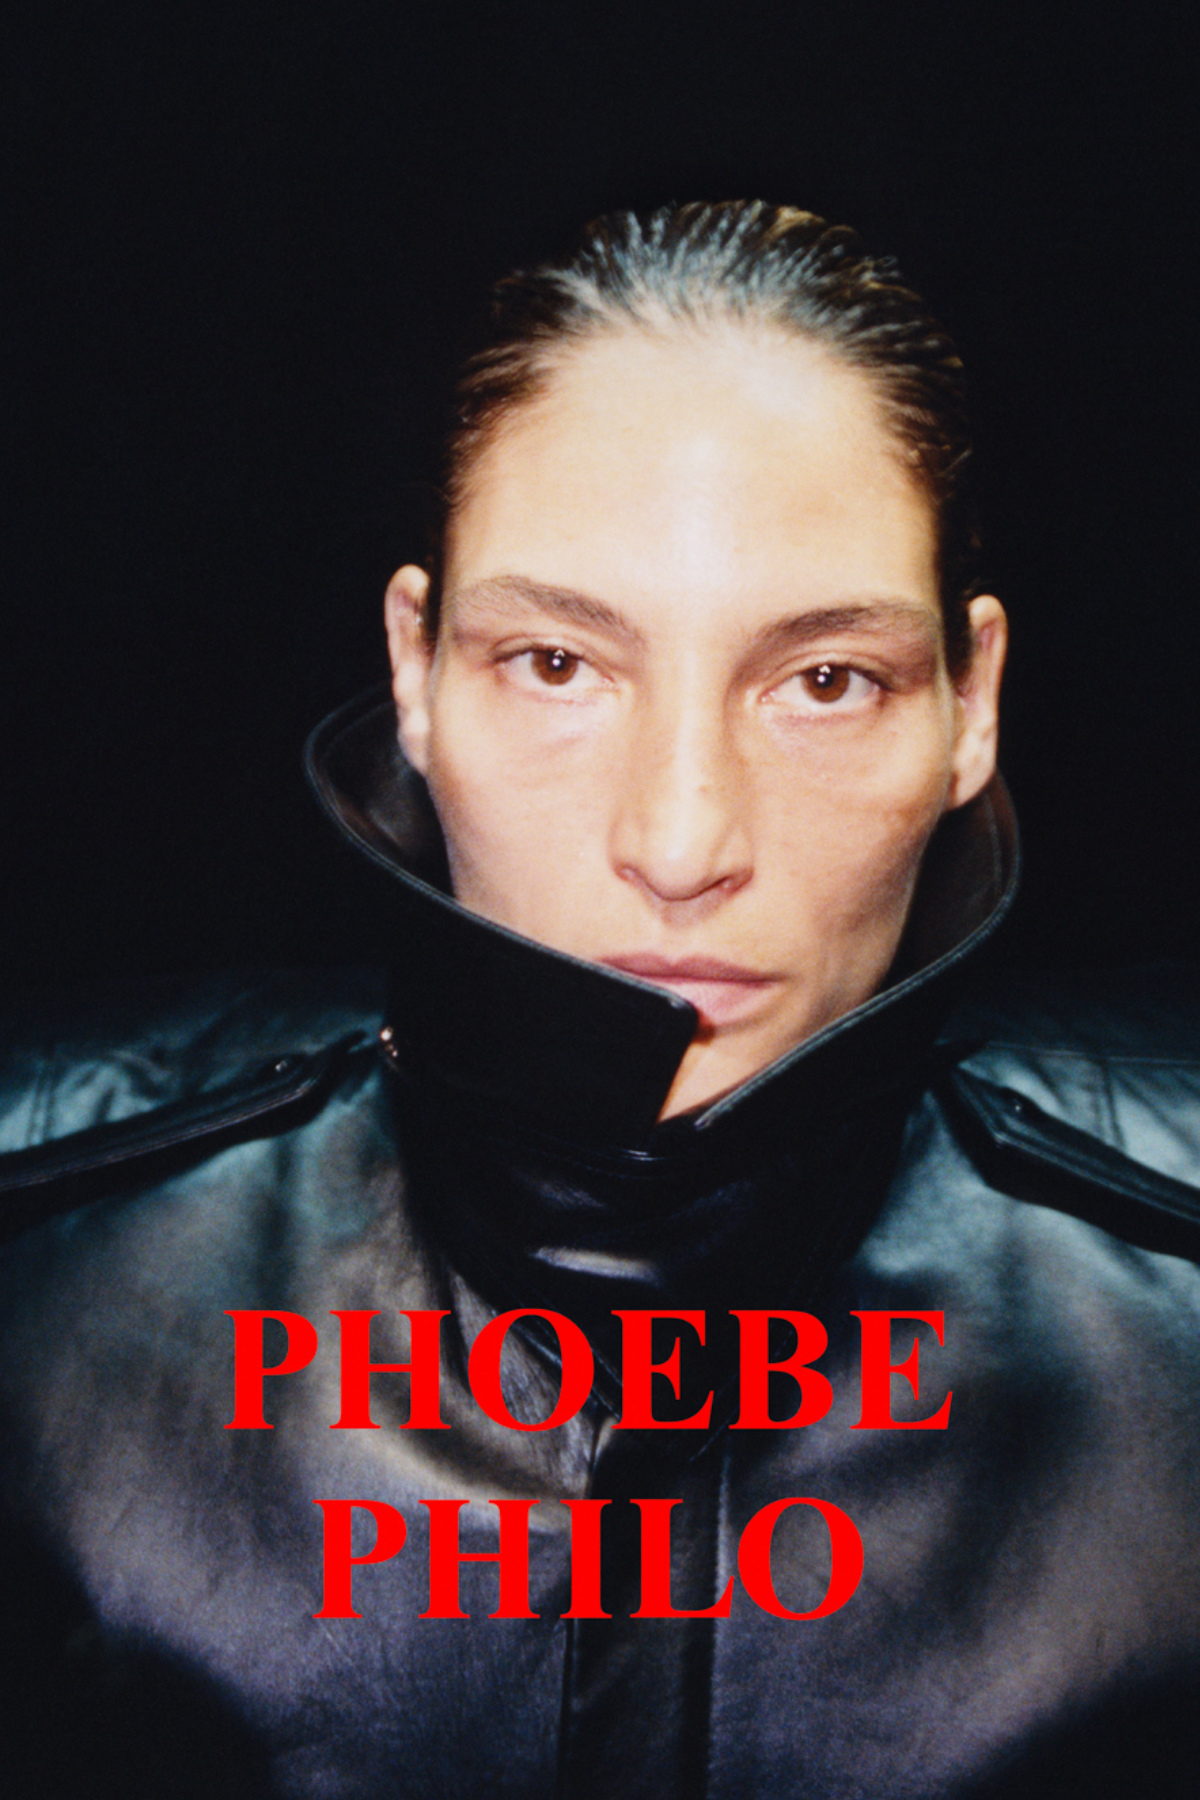 Phoebe Philo Just Launched Fashion's Most Anticipated Collection